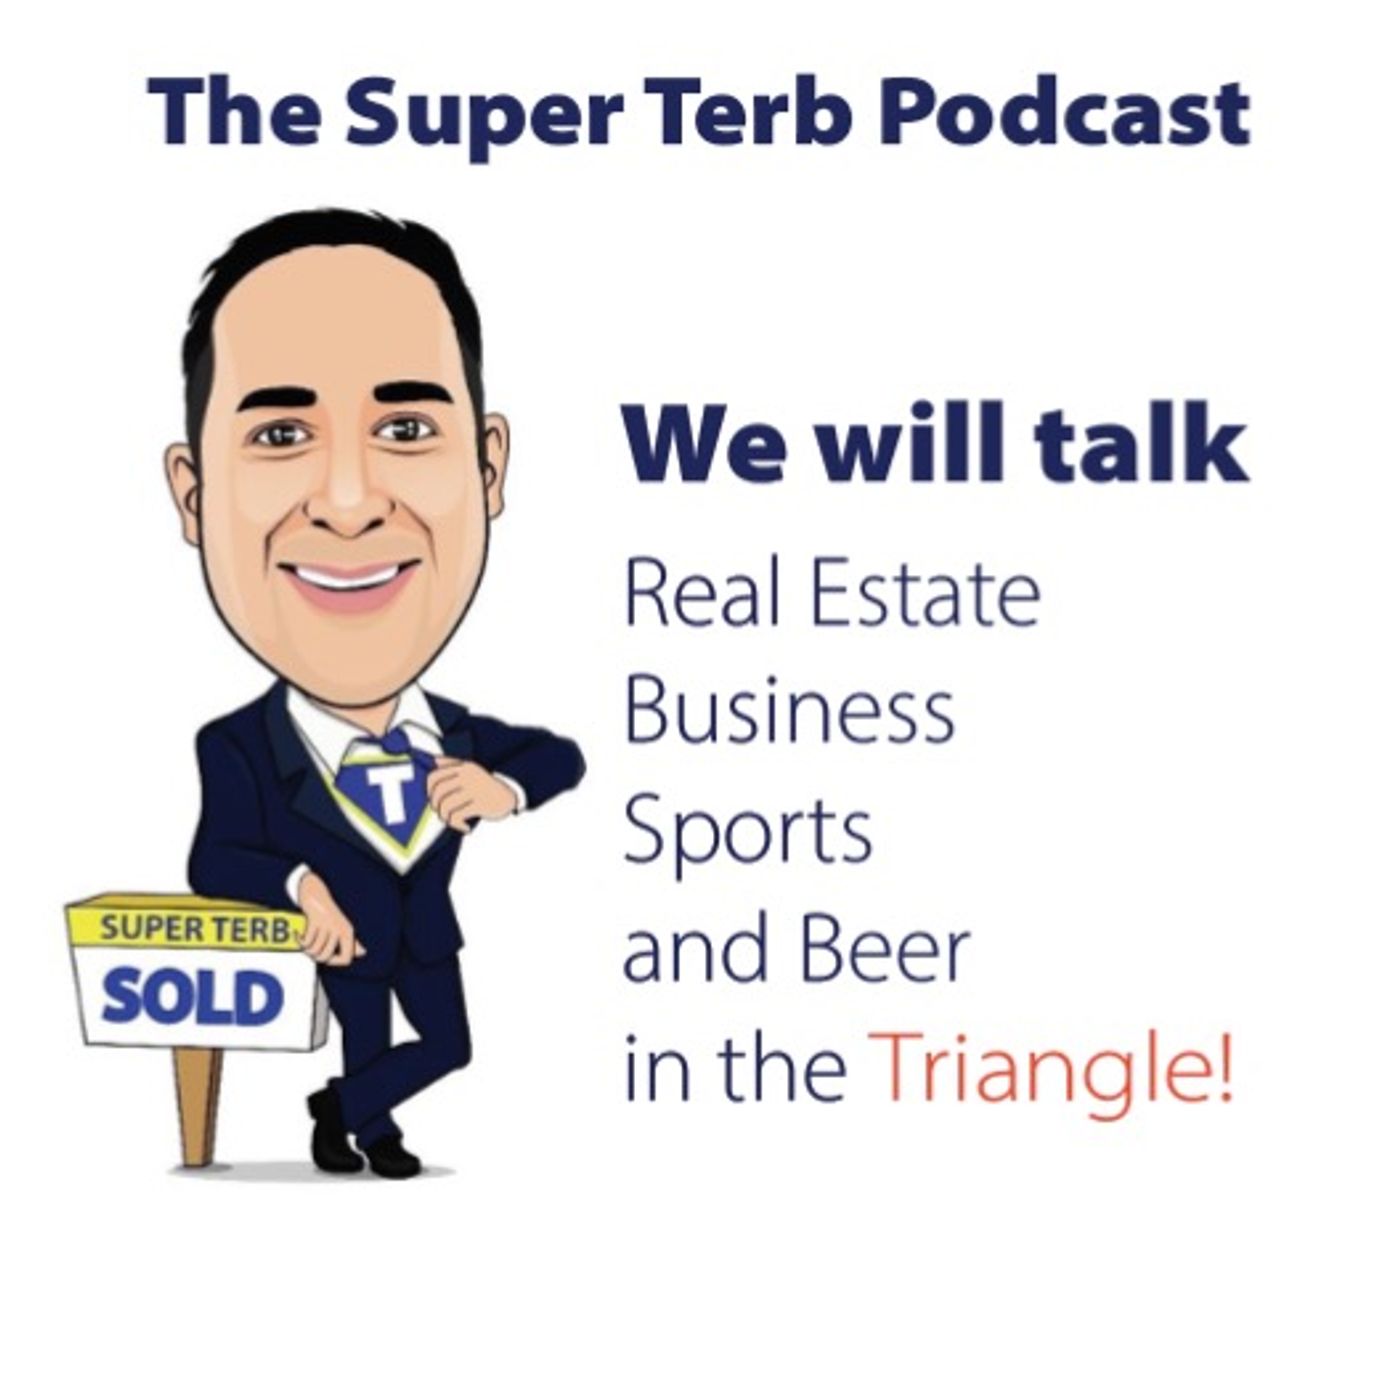 🎙The ”Super Terb Podcast”, Episode 50 is live! I